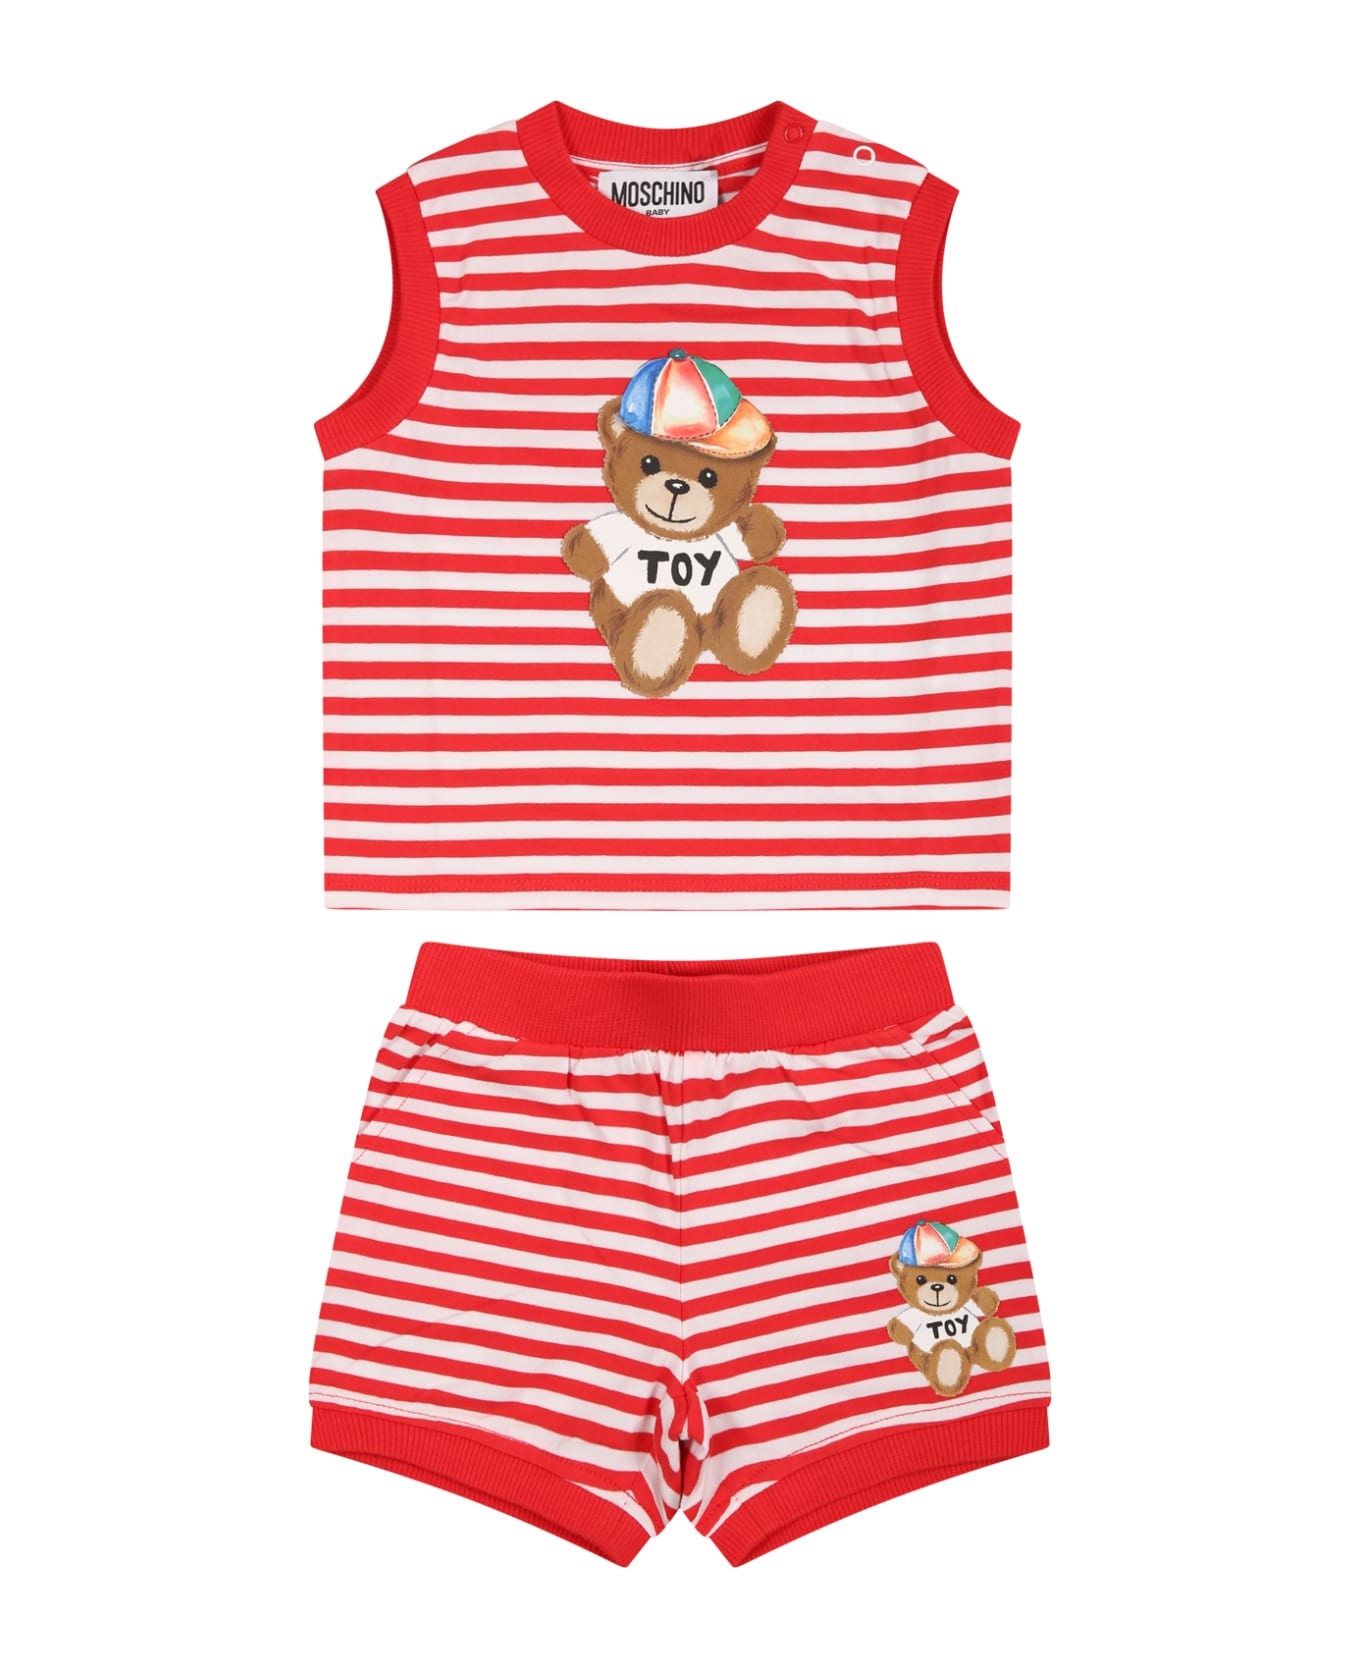 Moschino Red Suit For Baby Boy With Teddy Bear - Red ボトムス